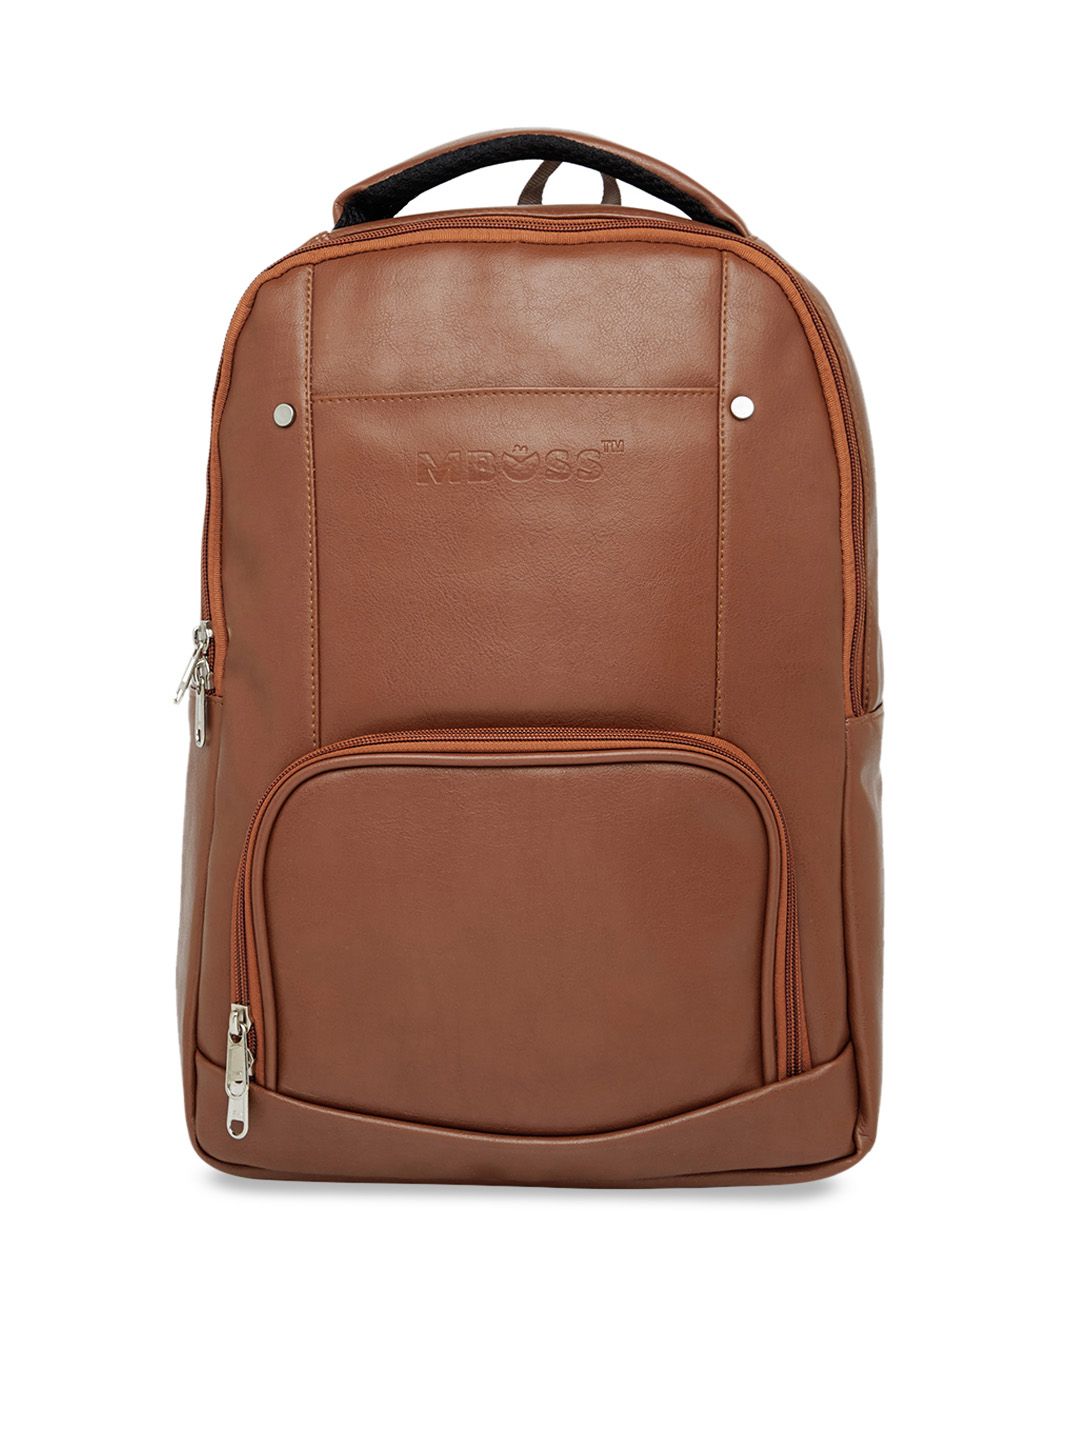 MBOSS Unisex Tan Solid Backpack Price in India